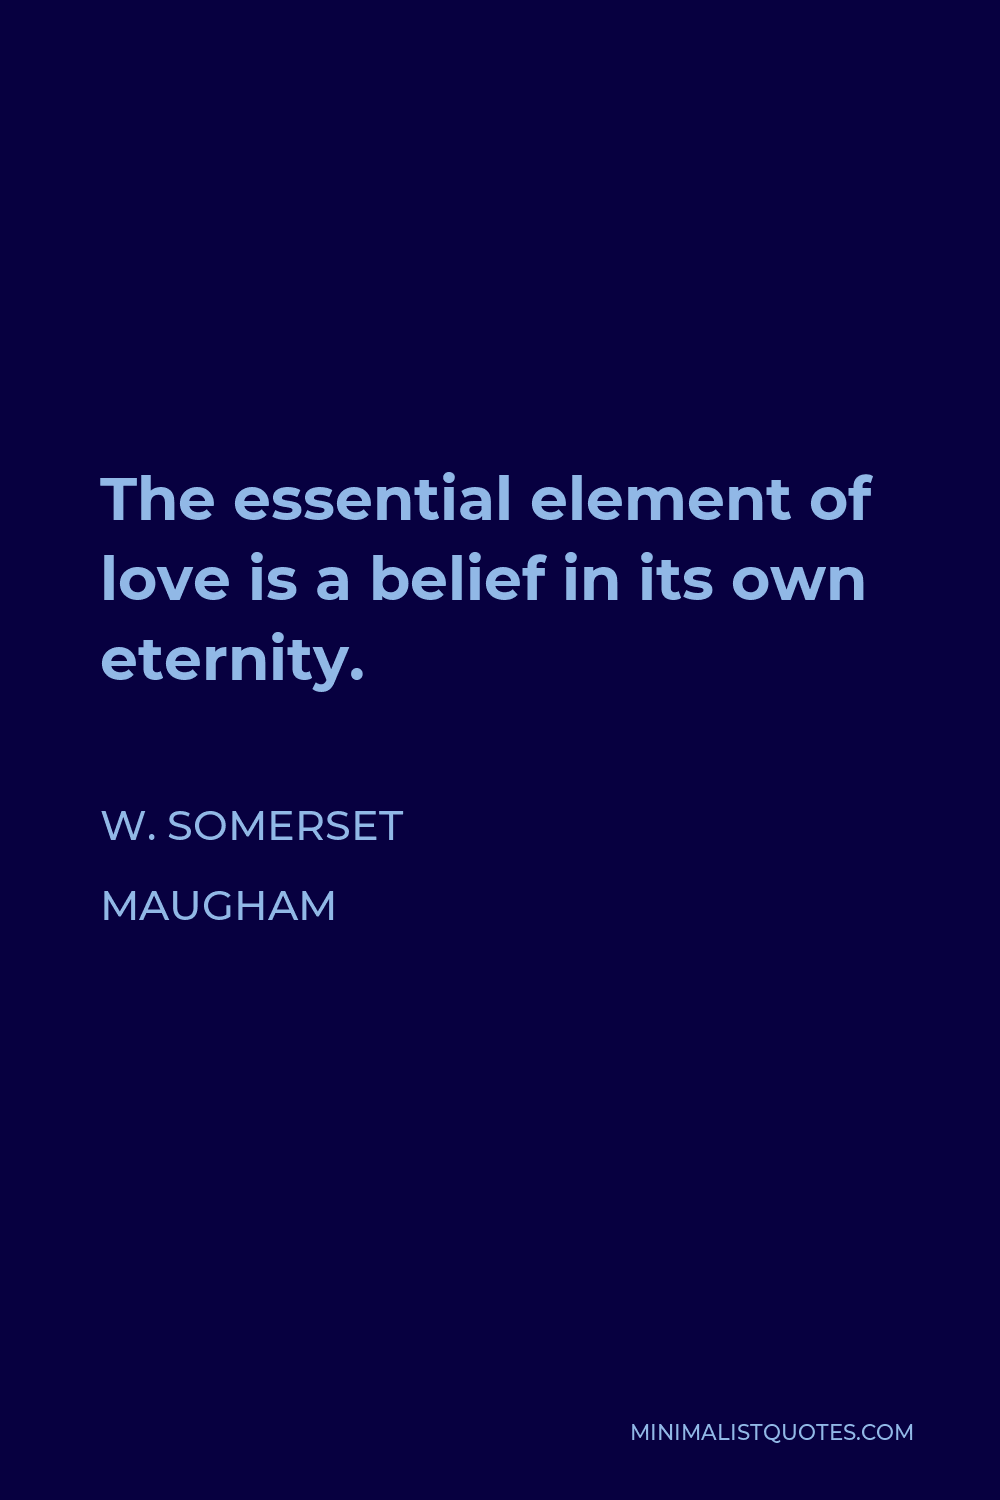 W. Somerset Maugham Quote - The essential element of love is a belief in its own eternity.